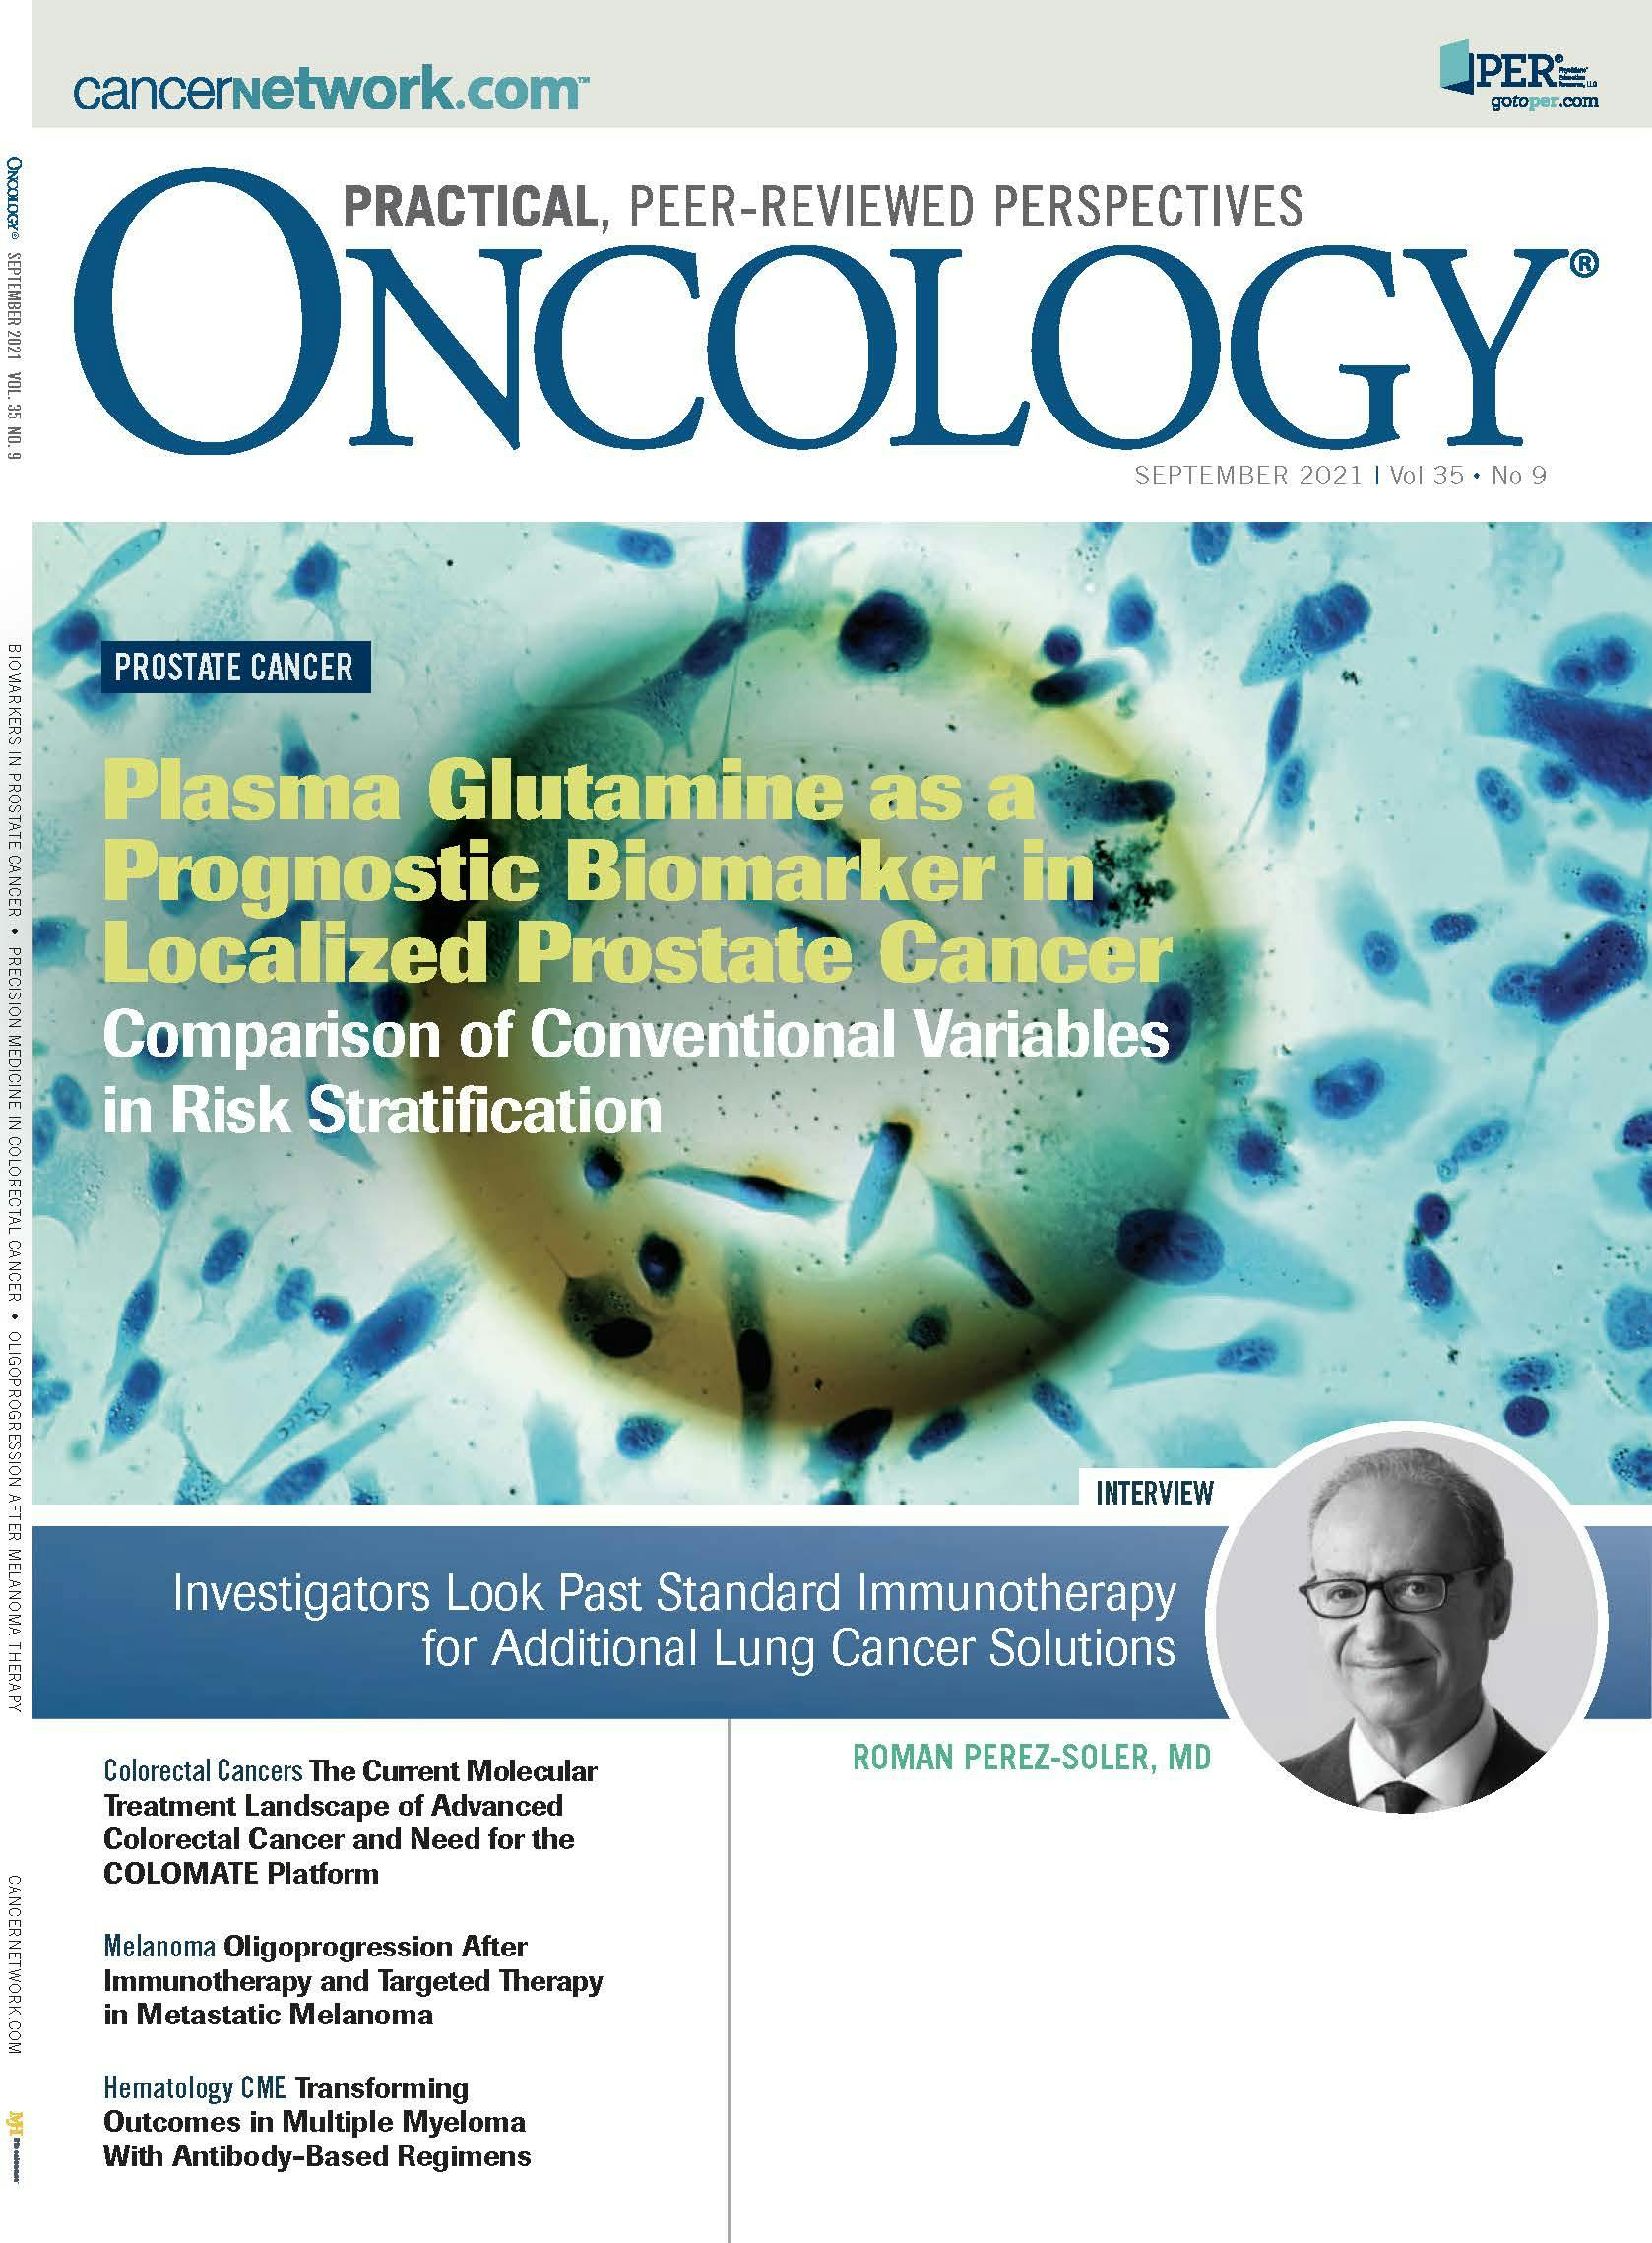 ONCOLOGY Vol 35, Issue 9